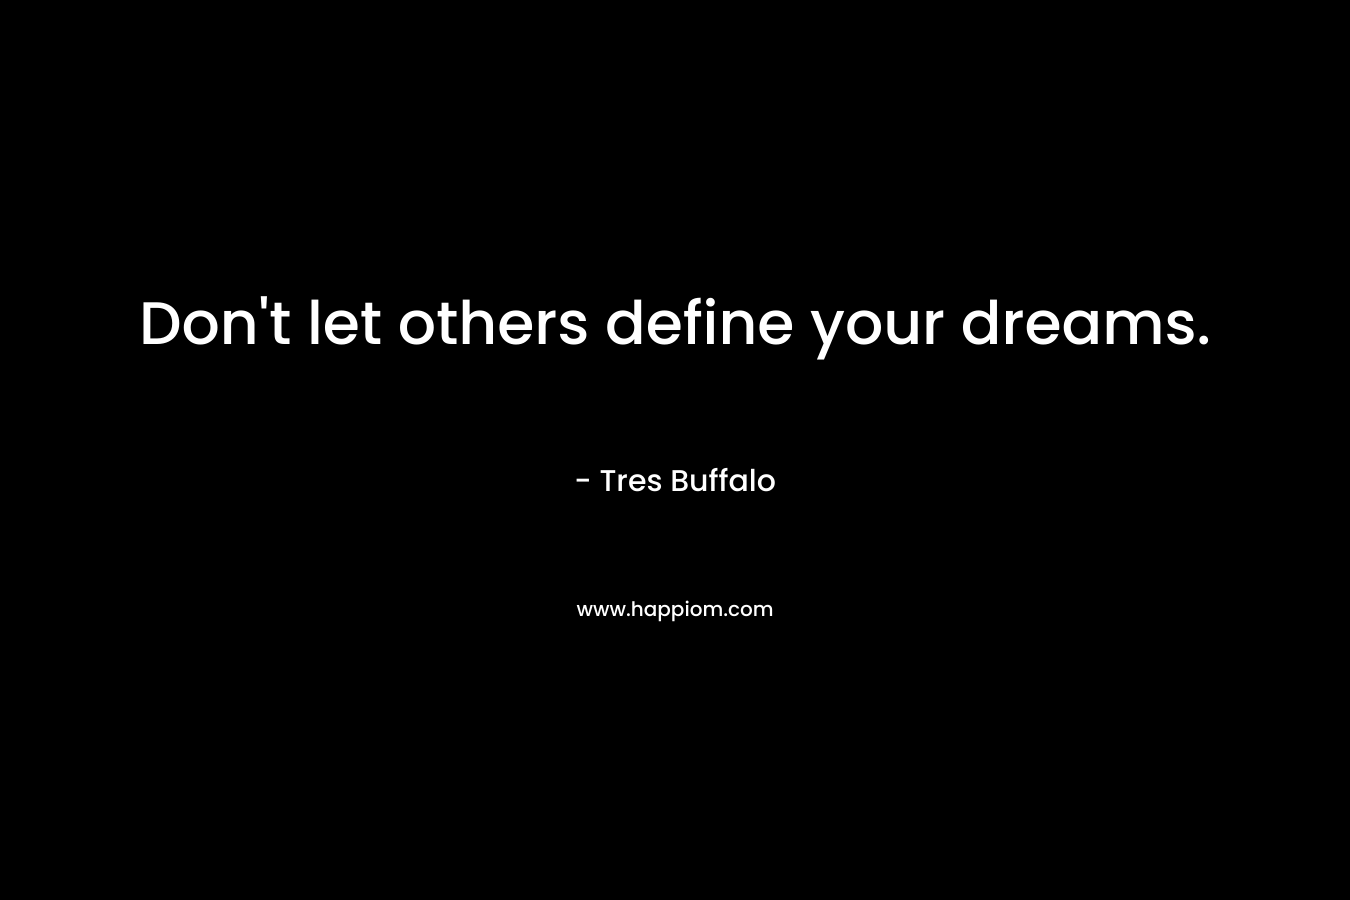 Don’t let others define your dreams. – Tres Buffalo